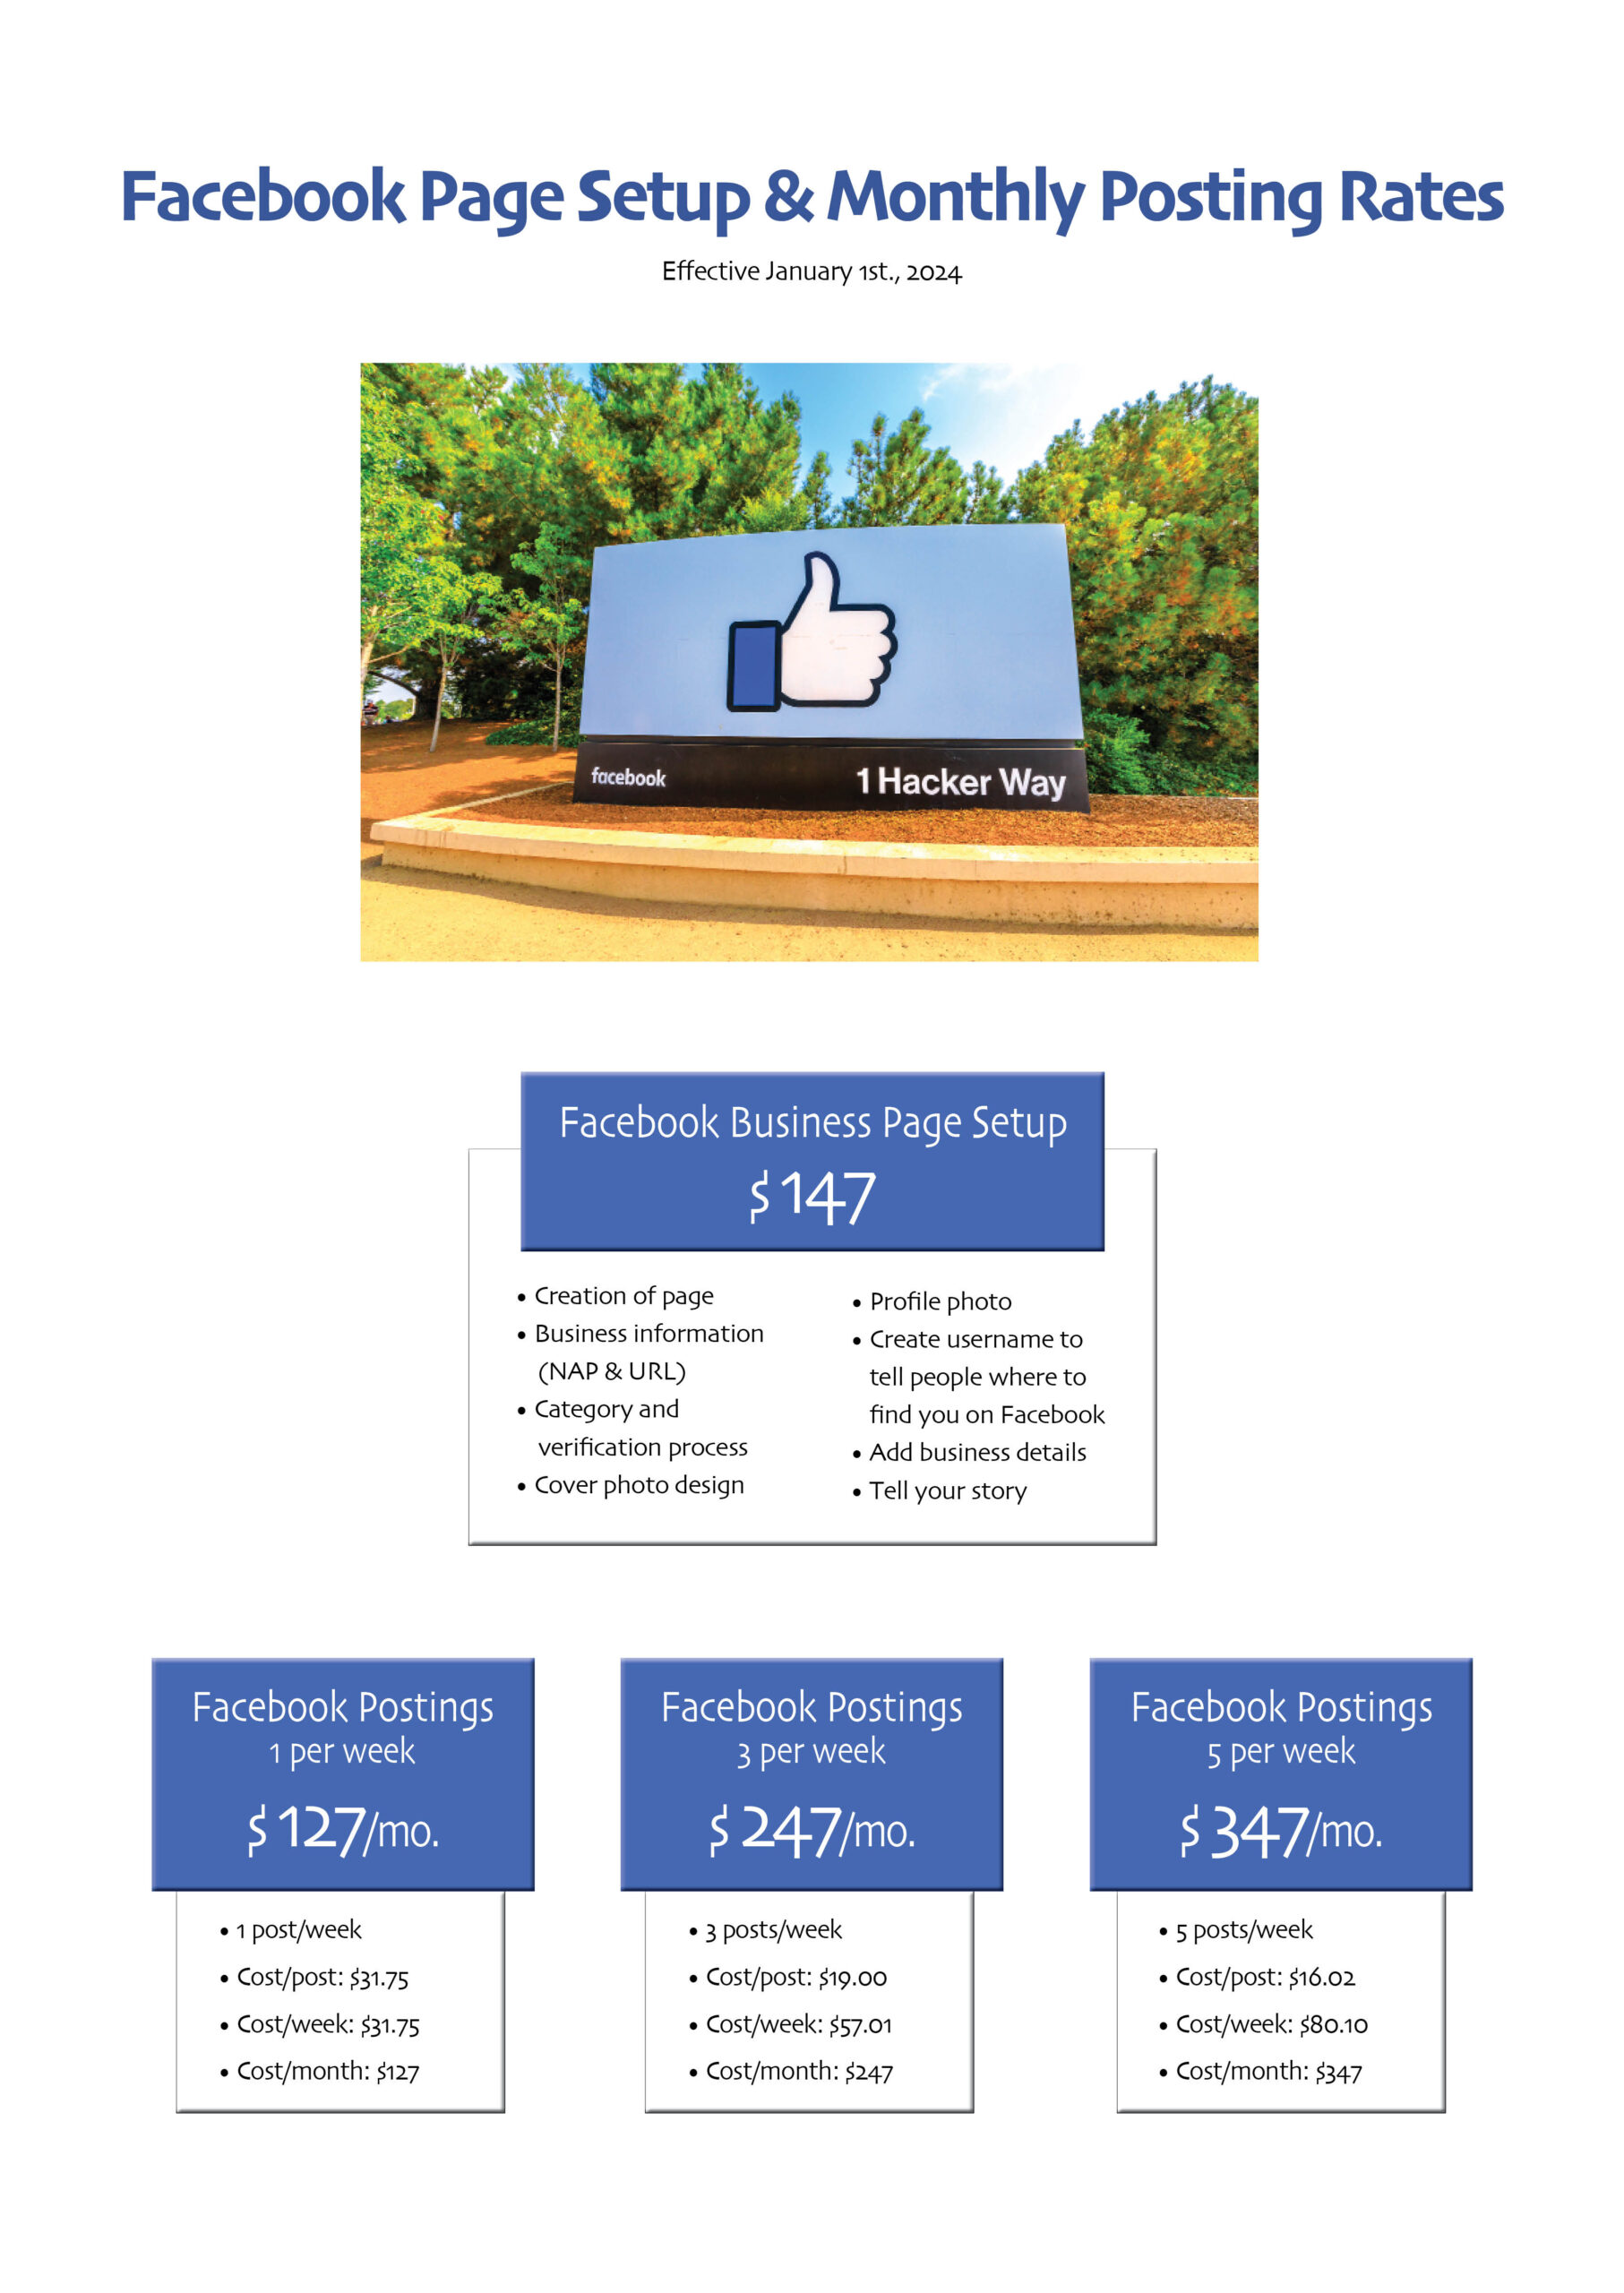 facebook-page-setup-and-posting-rates-effective-january-1st-2024